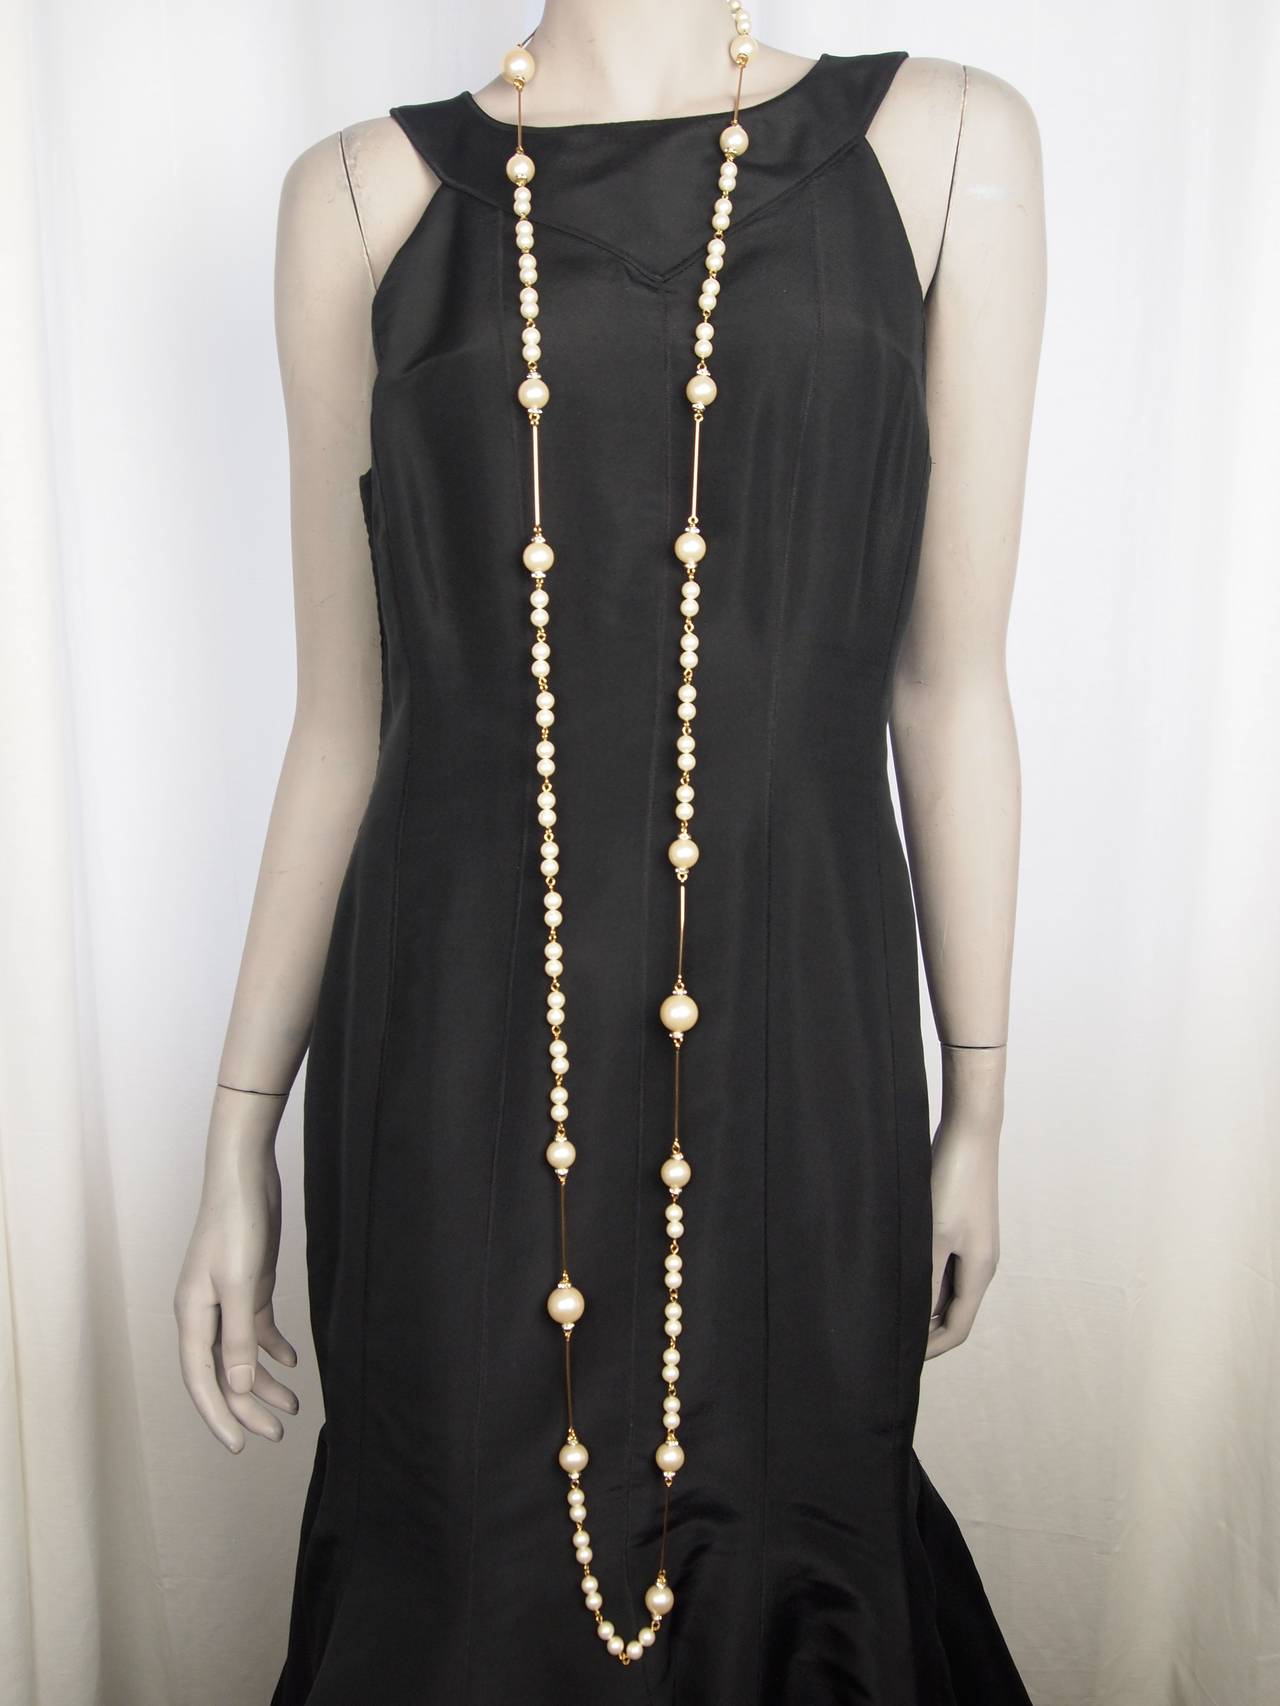 Women's Chanel Long Pearl Necklace Autumn/Winter 2001-2002 For Sale